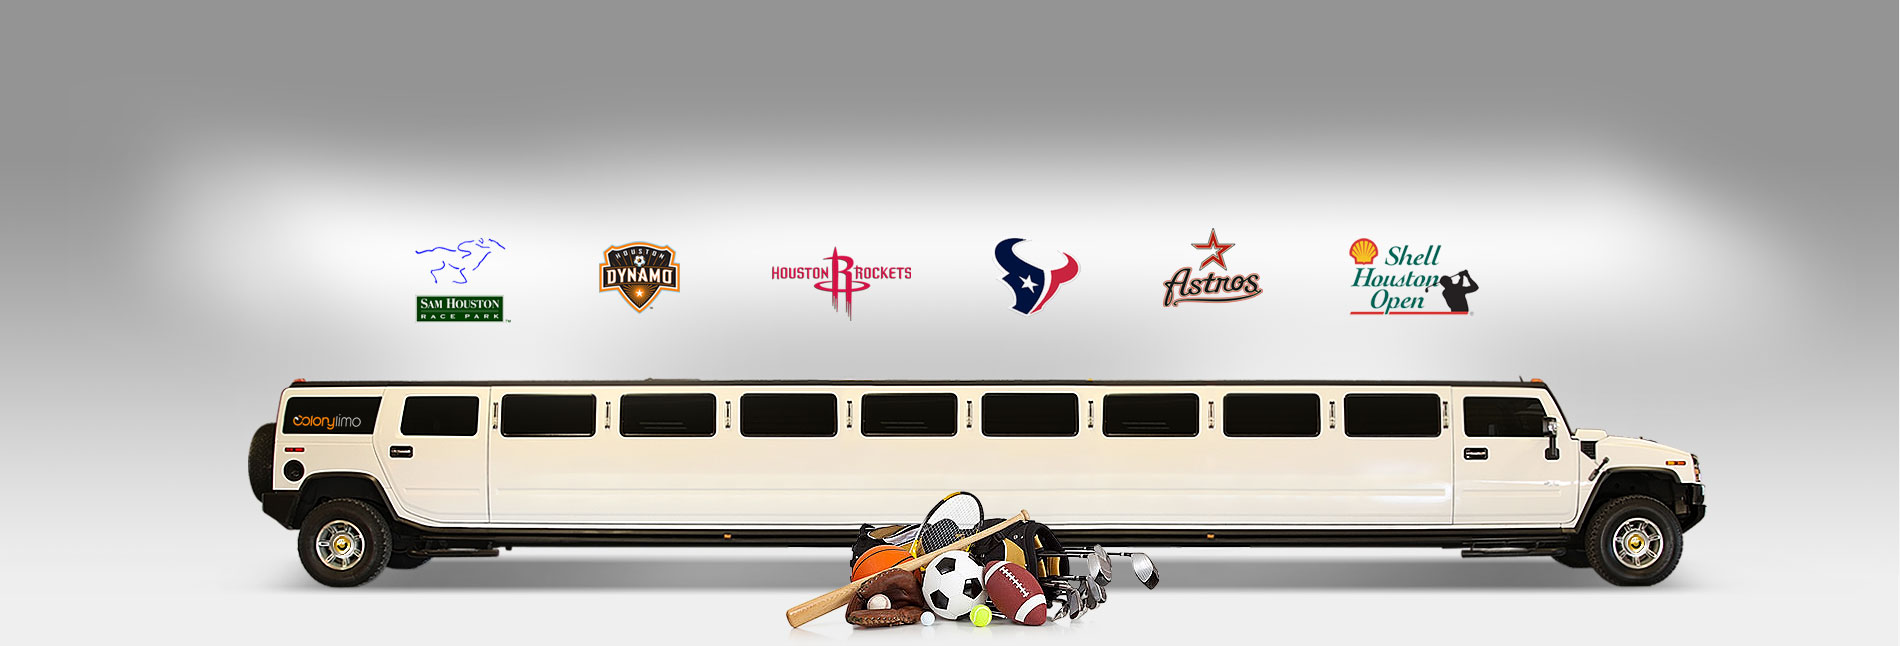 Sporting Events Limo - Party Bus - Colony Limo Service Houston